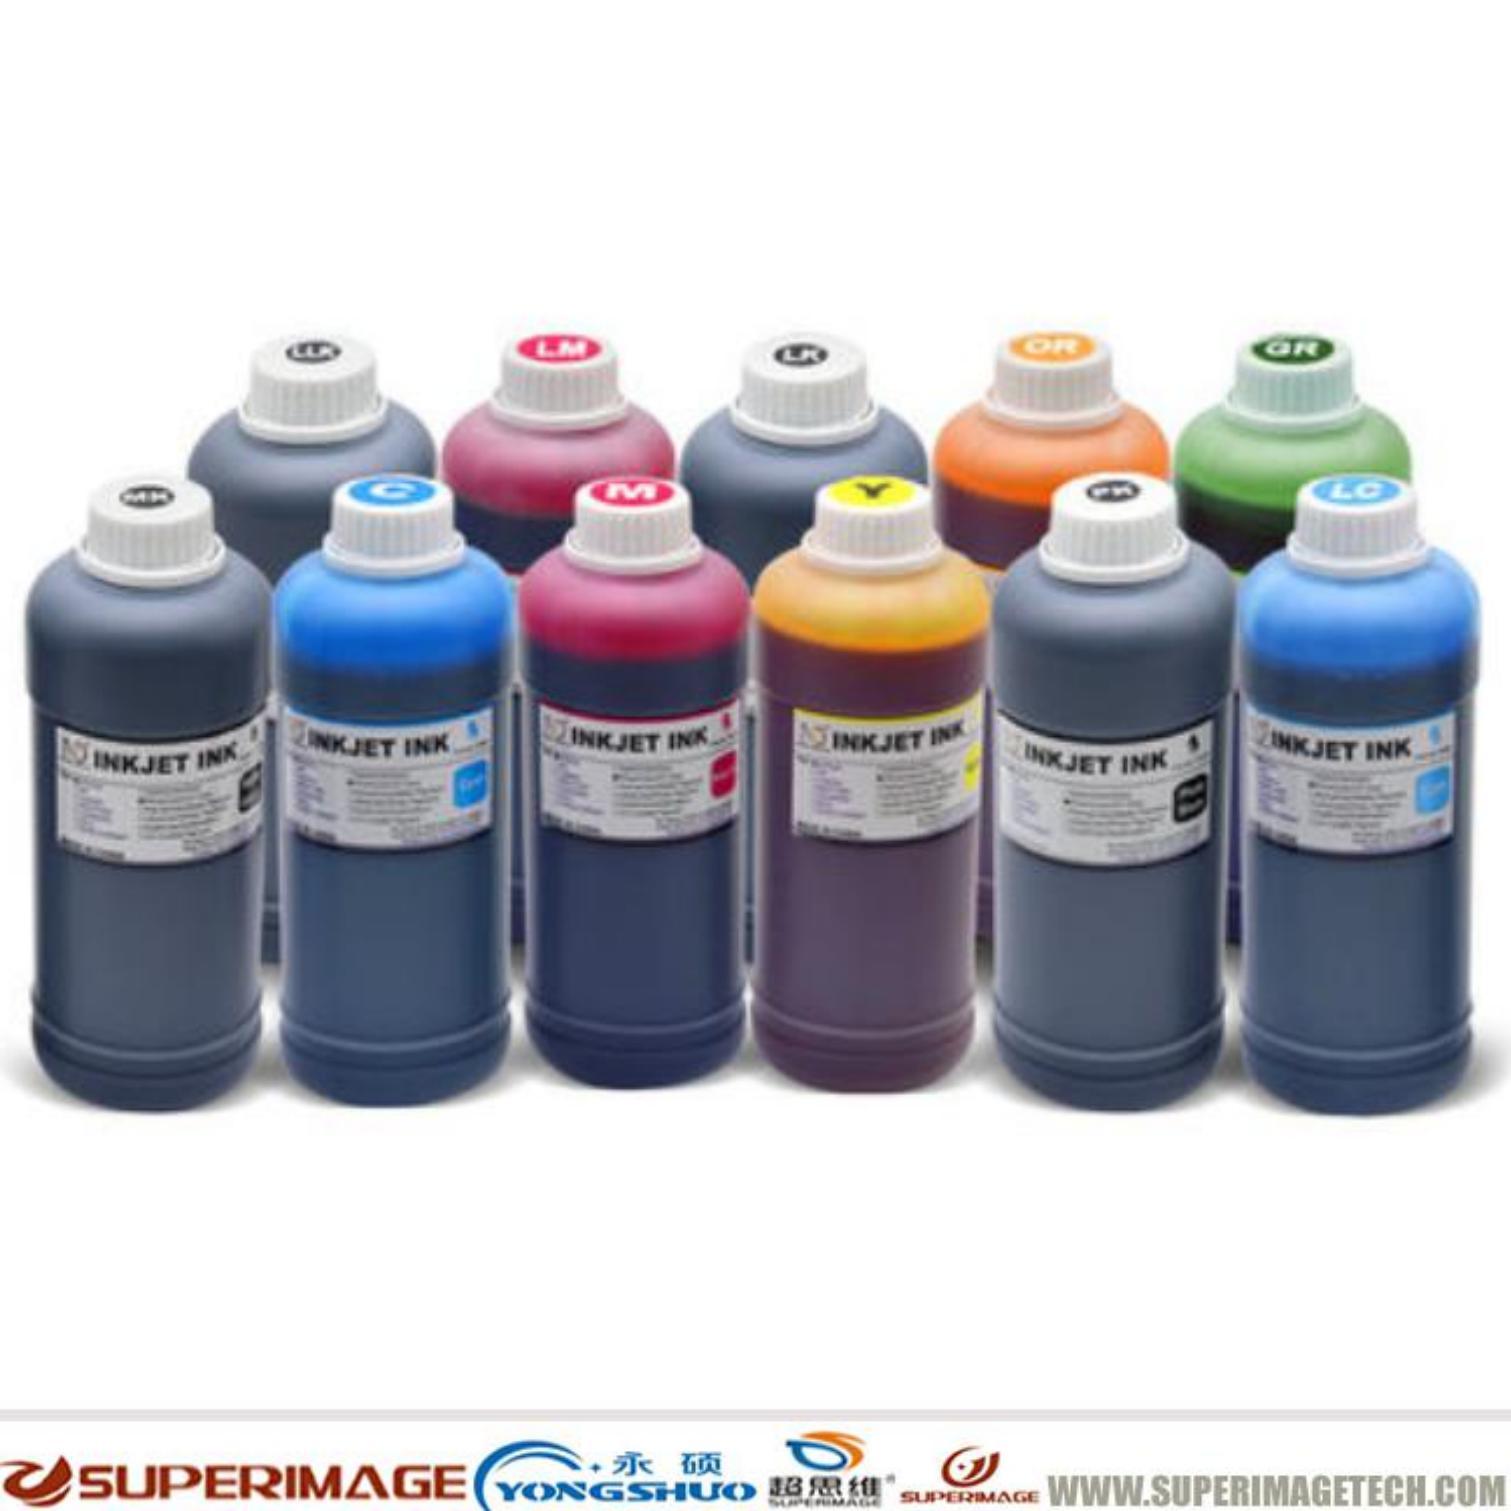 Durager SD Inks (Direct print SD Ink for Durager)